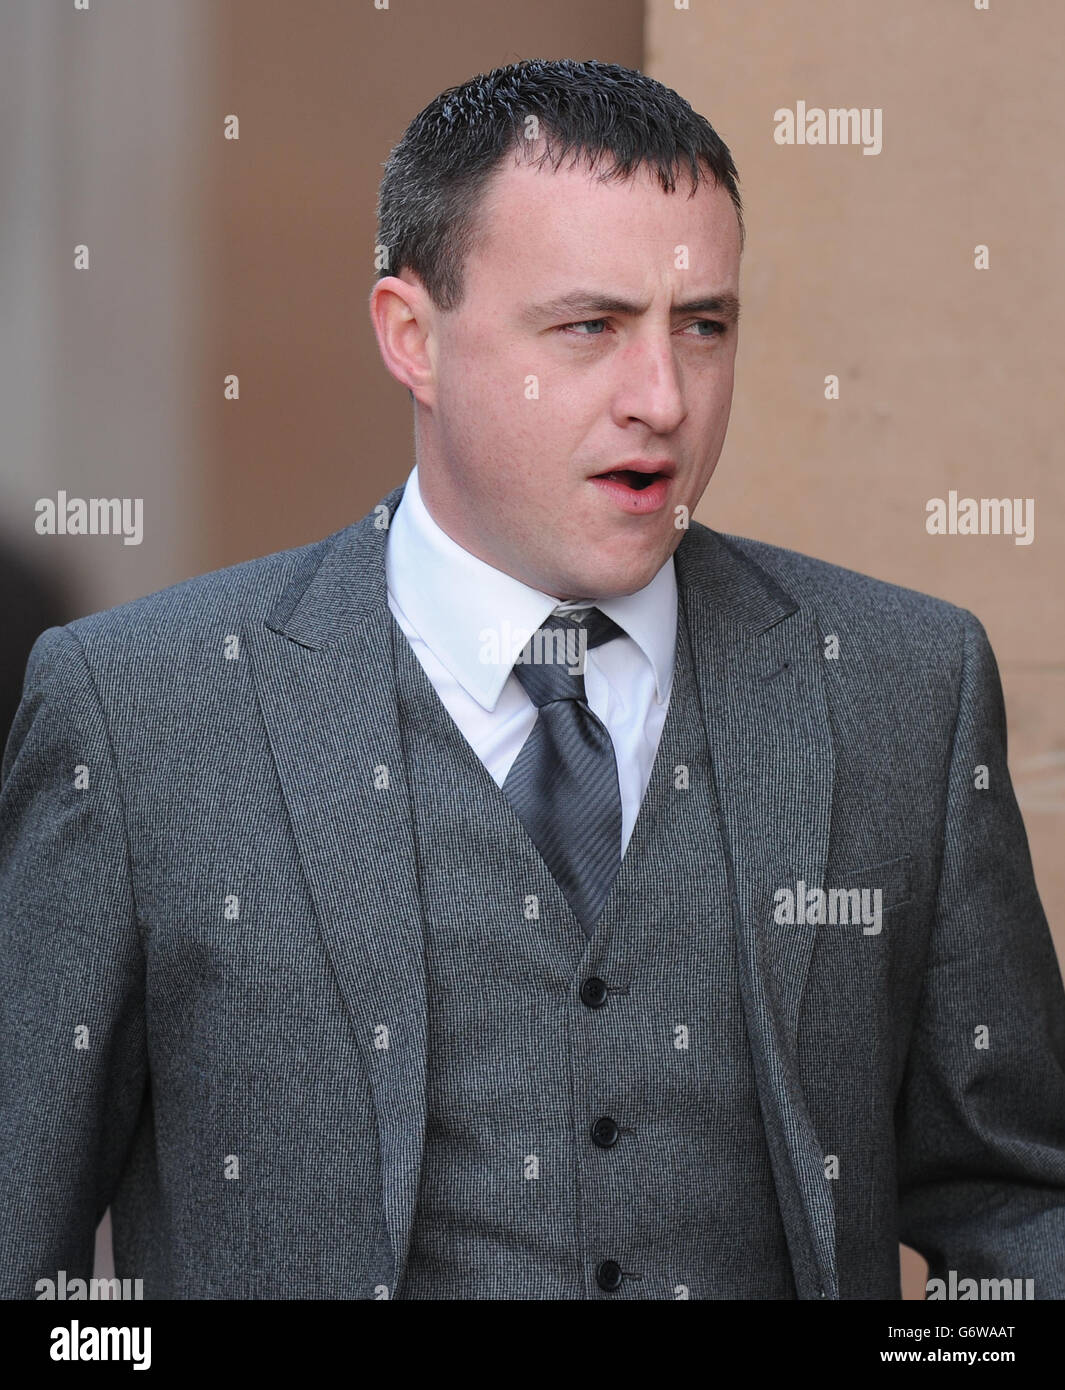 Philip McGilvray, aged 33, arrives at Newcastle Crown Court where he is accused alongside Alan French, 32, of an attack on the Casualty actor Clive Mantle who had part of his ear bitten off leaving him with a permanent disfigurement. Stock Photo